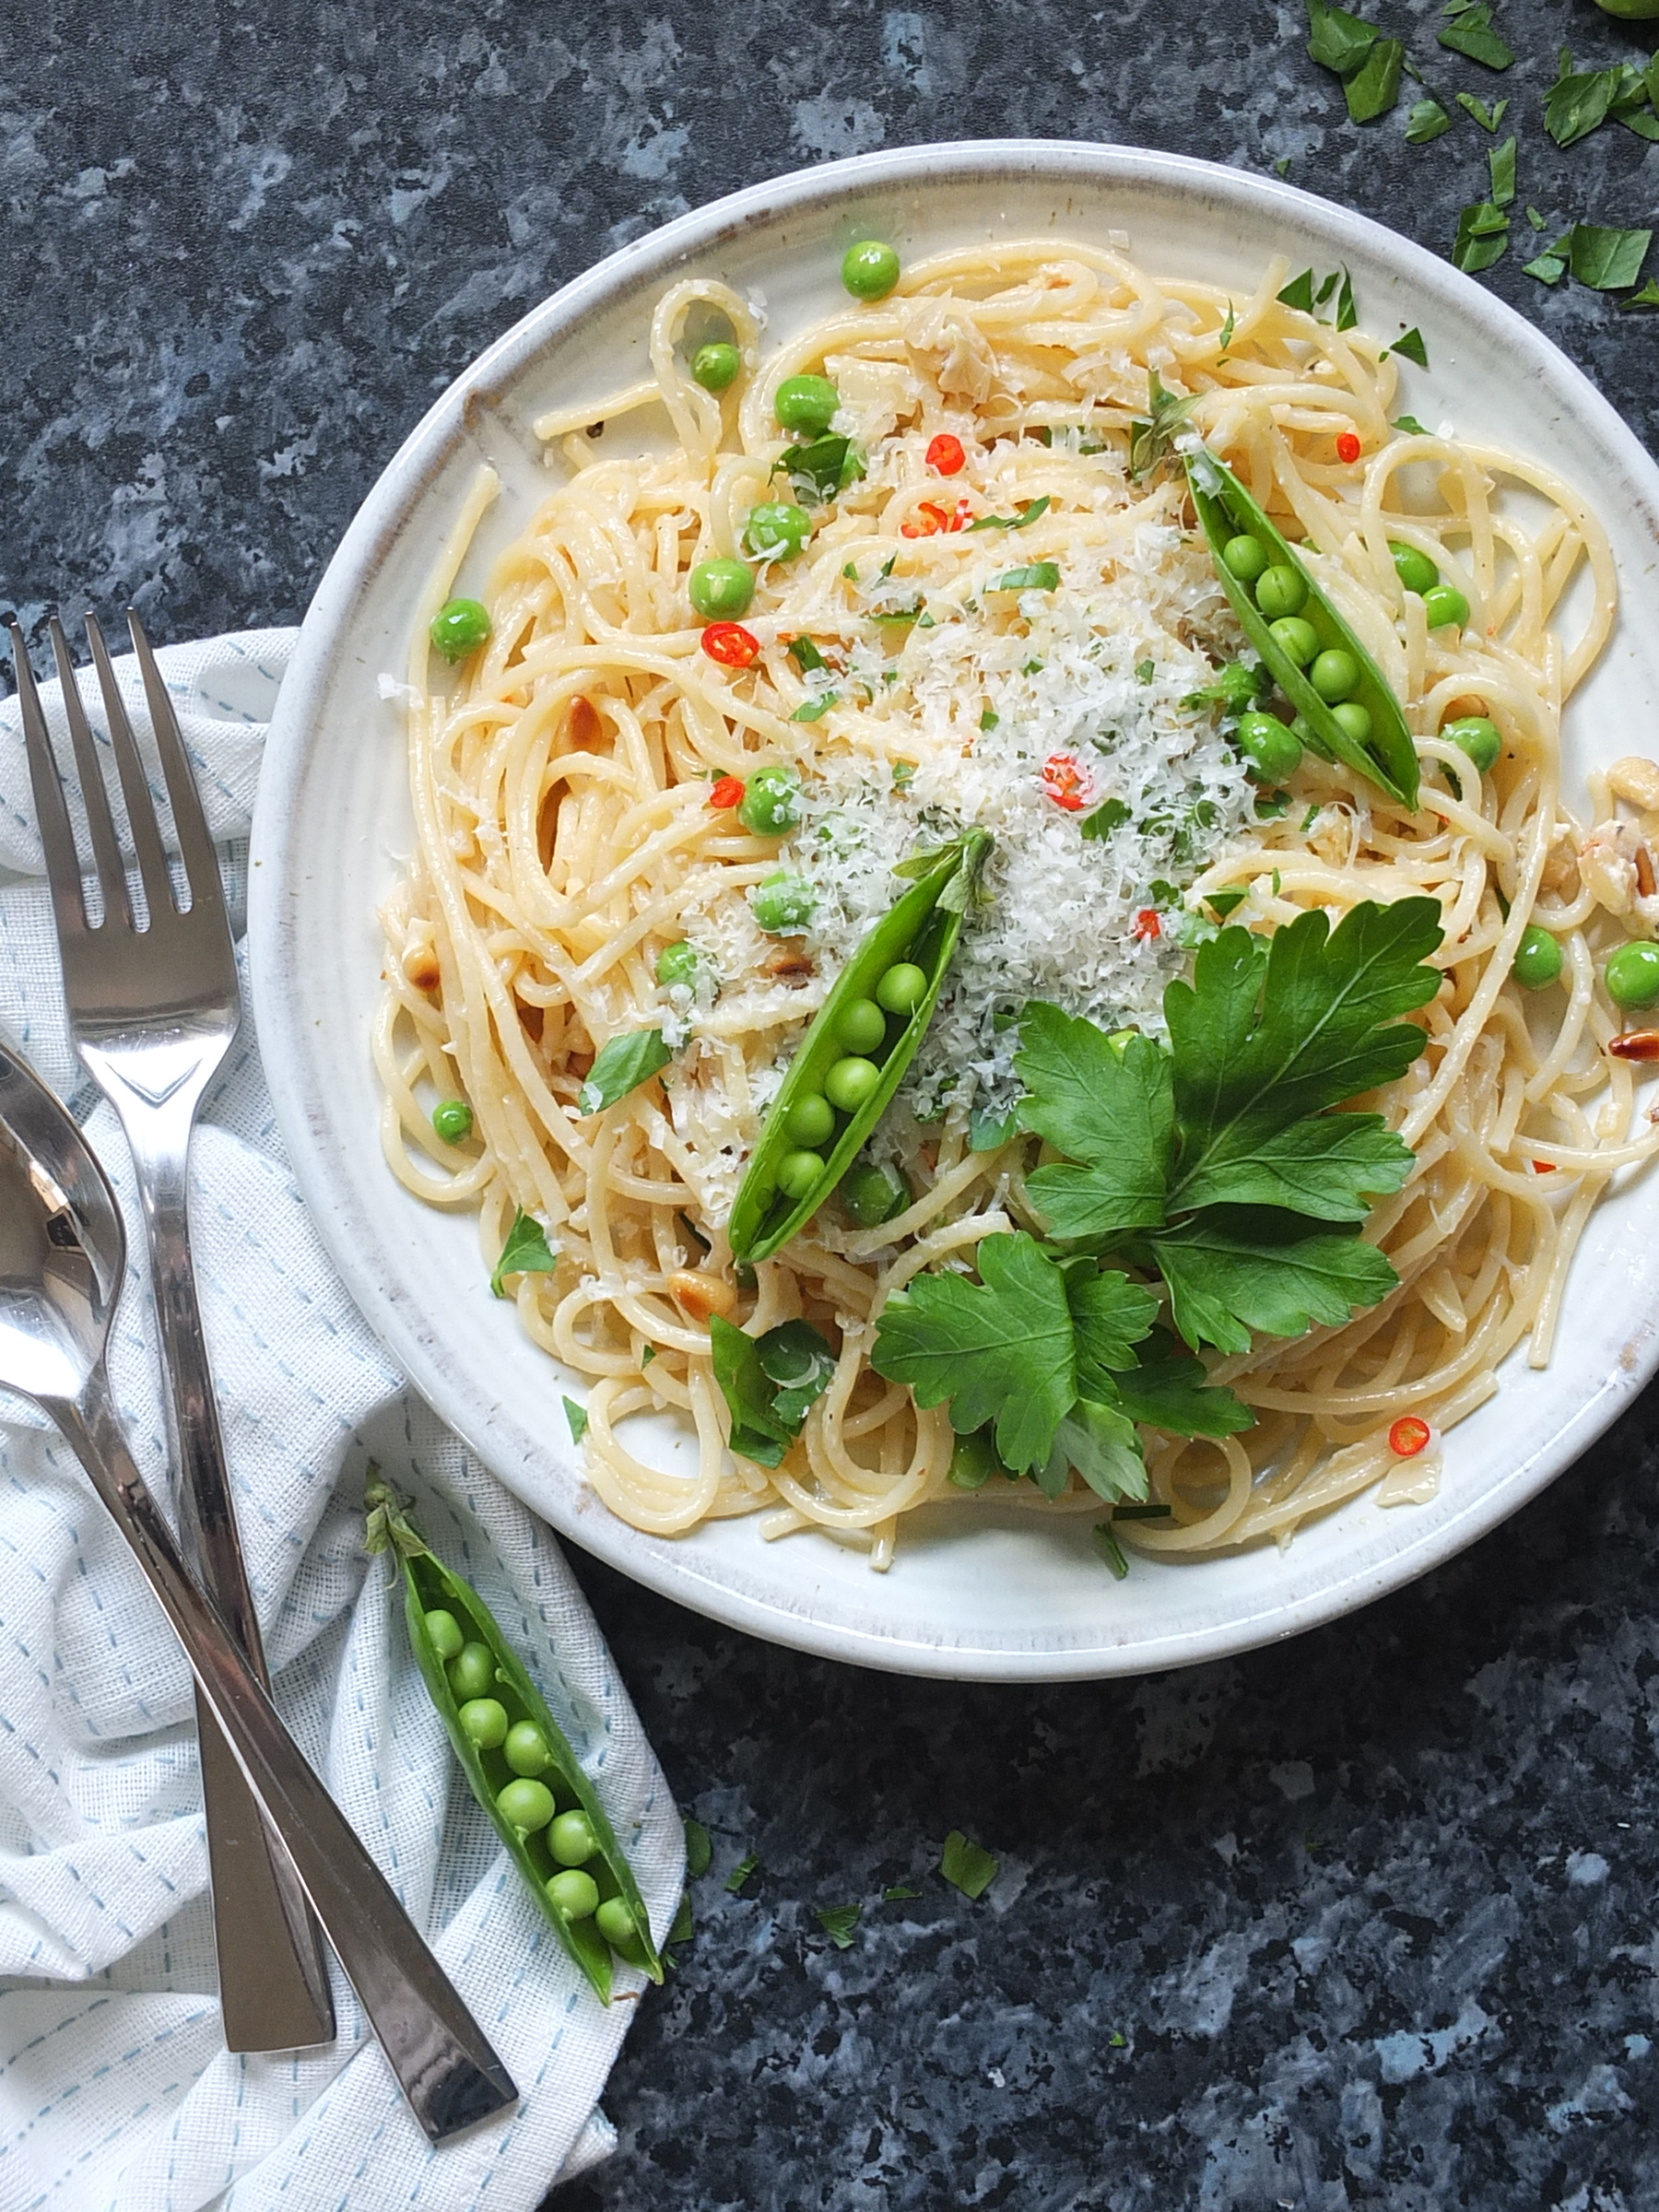 Top down image of a plate of spaghetti on a plate with green peas and grated cheese on top.